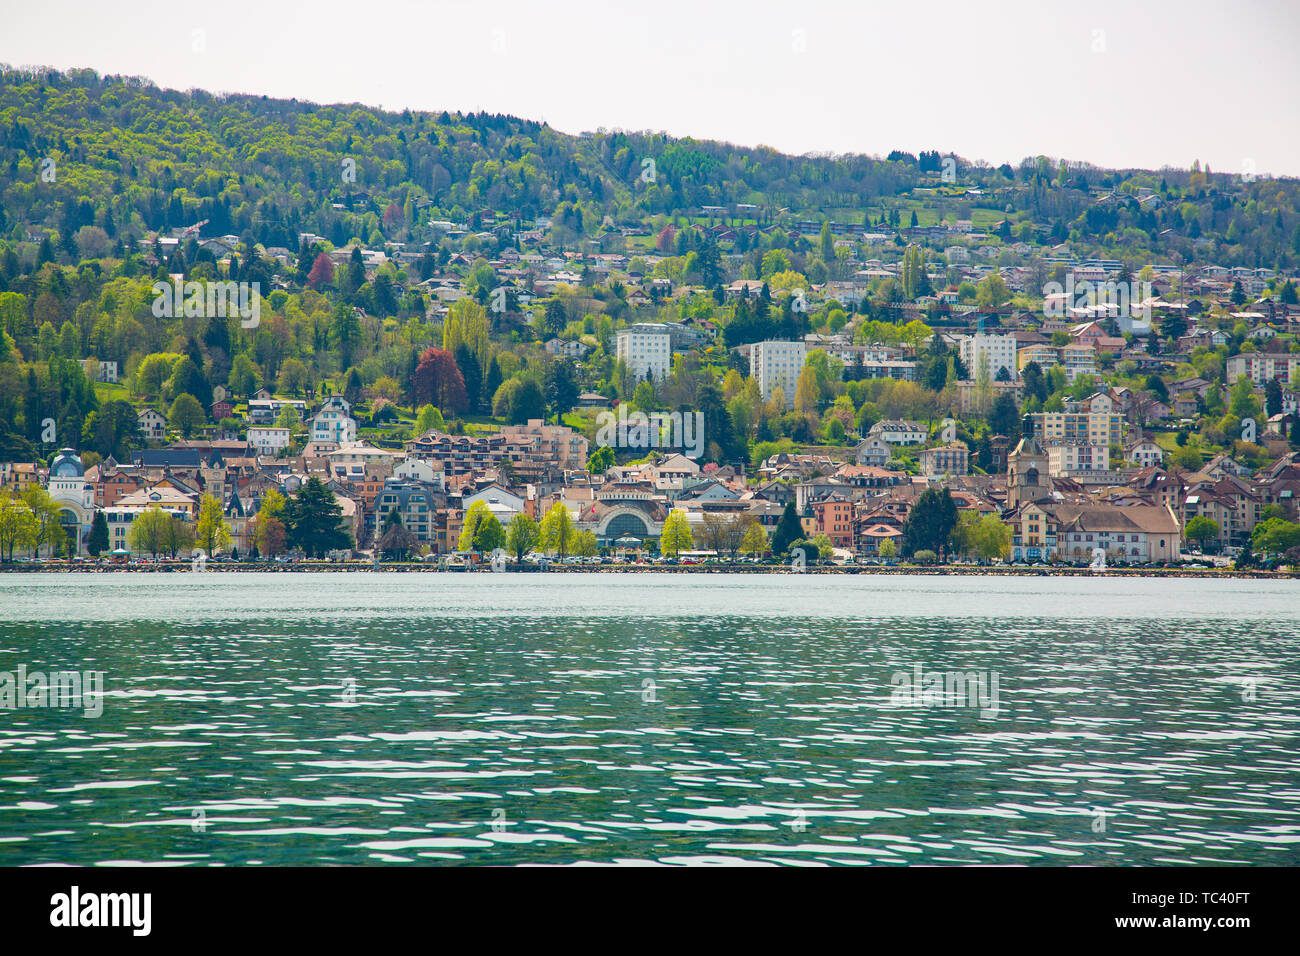 View of Evian-les-Bains city taken from Lake Geneva in France Stock Photo -  Alamy